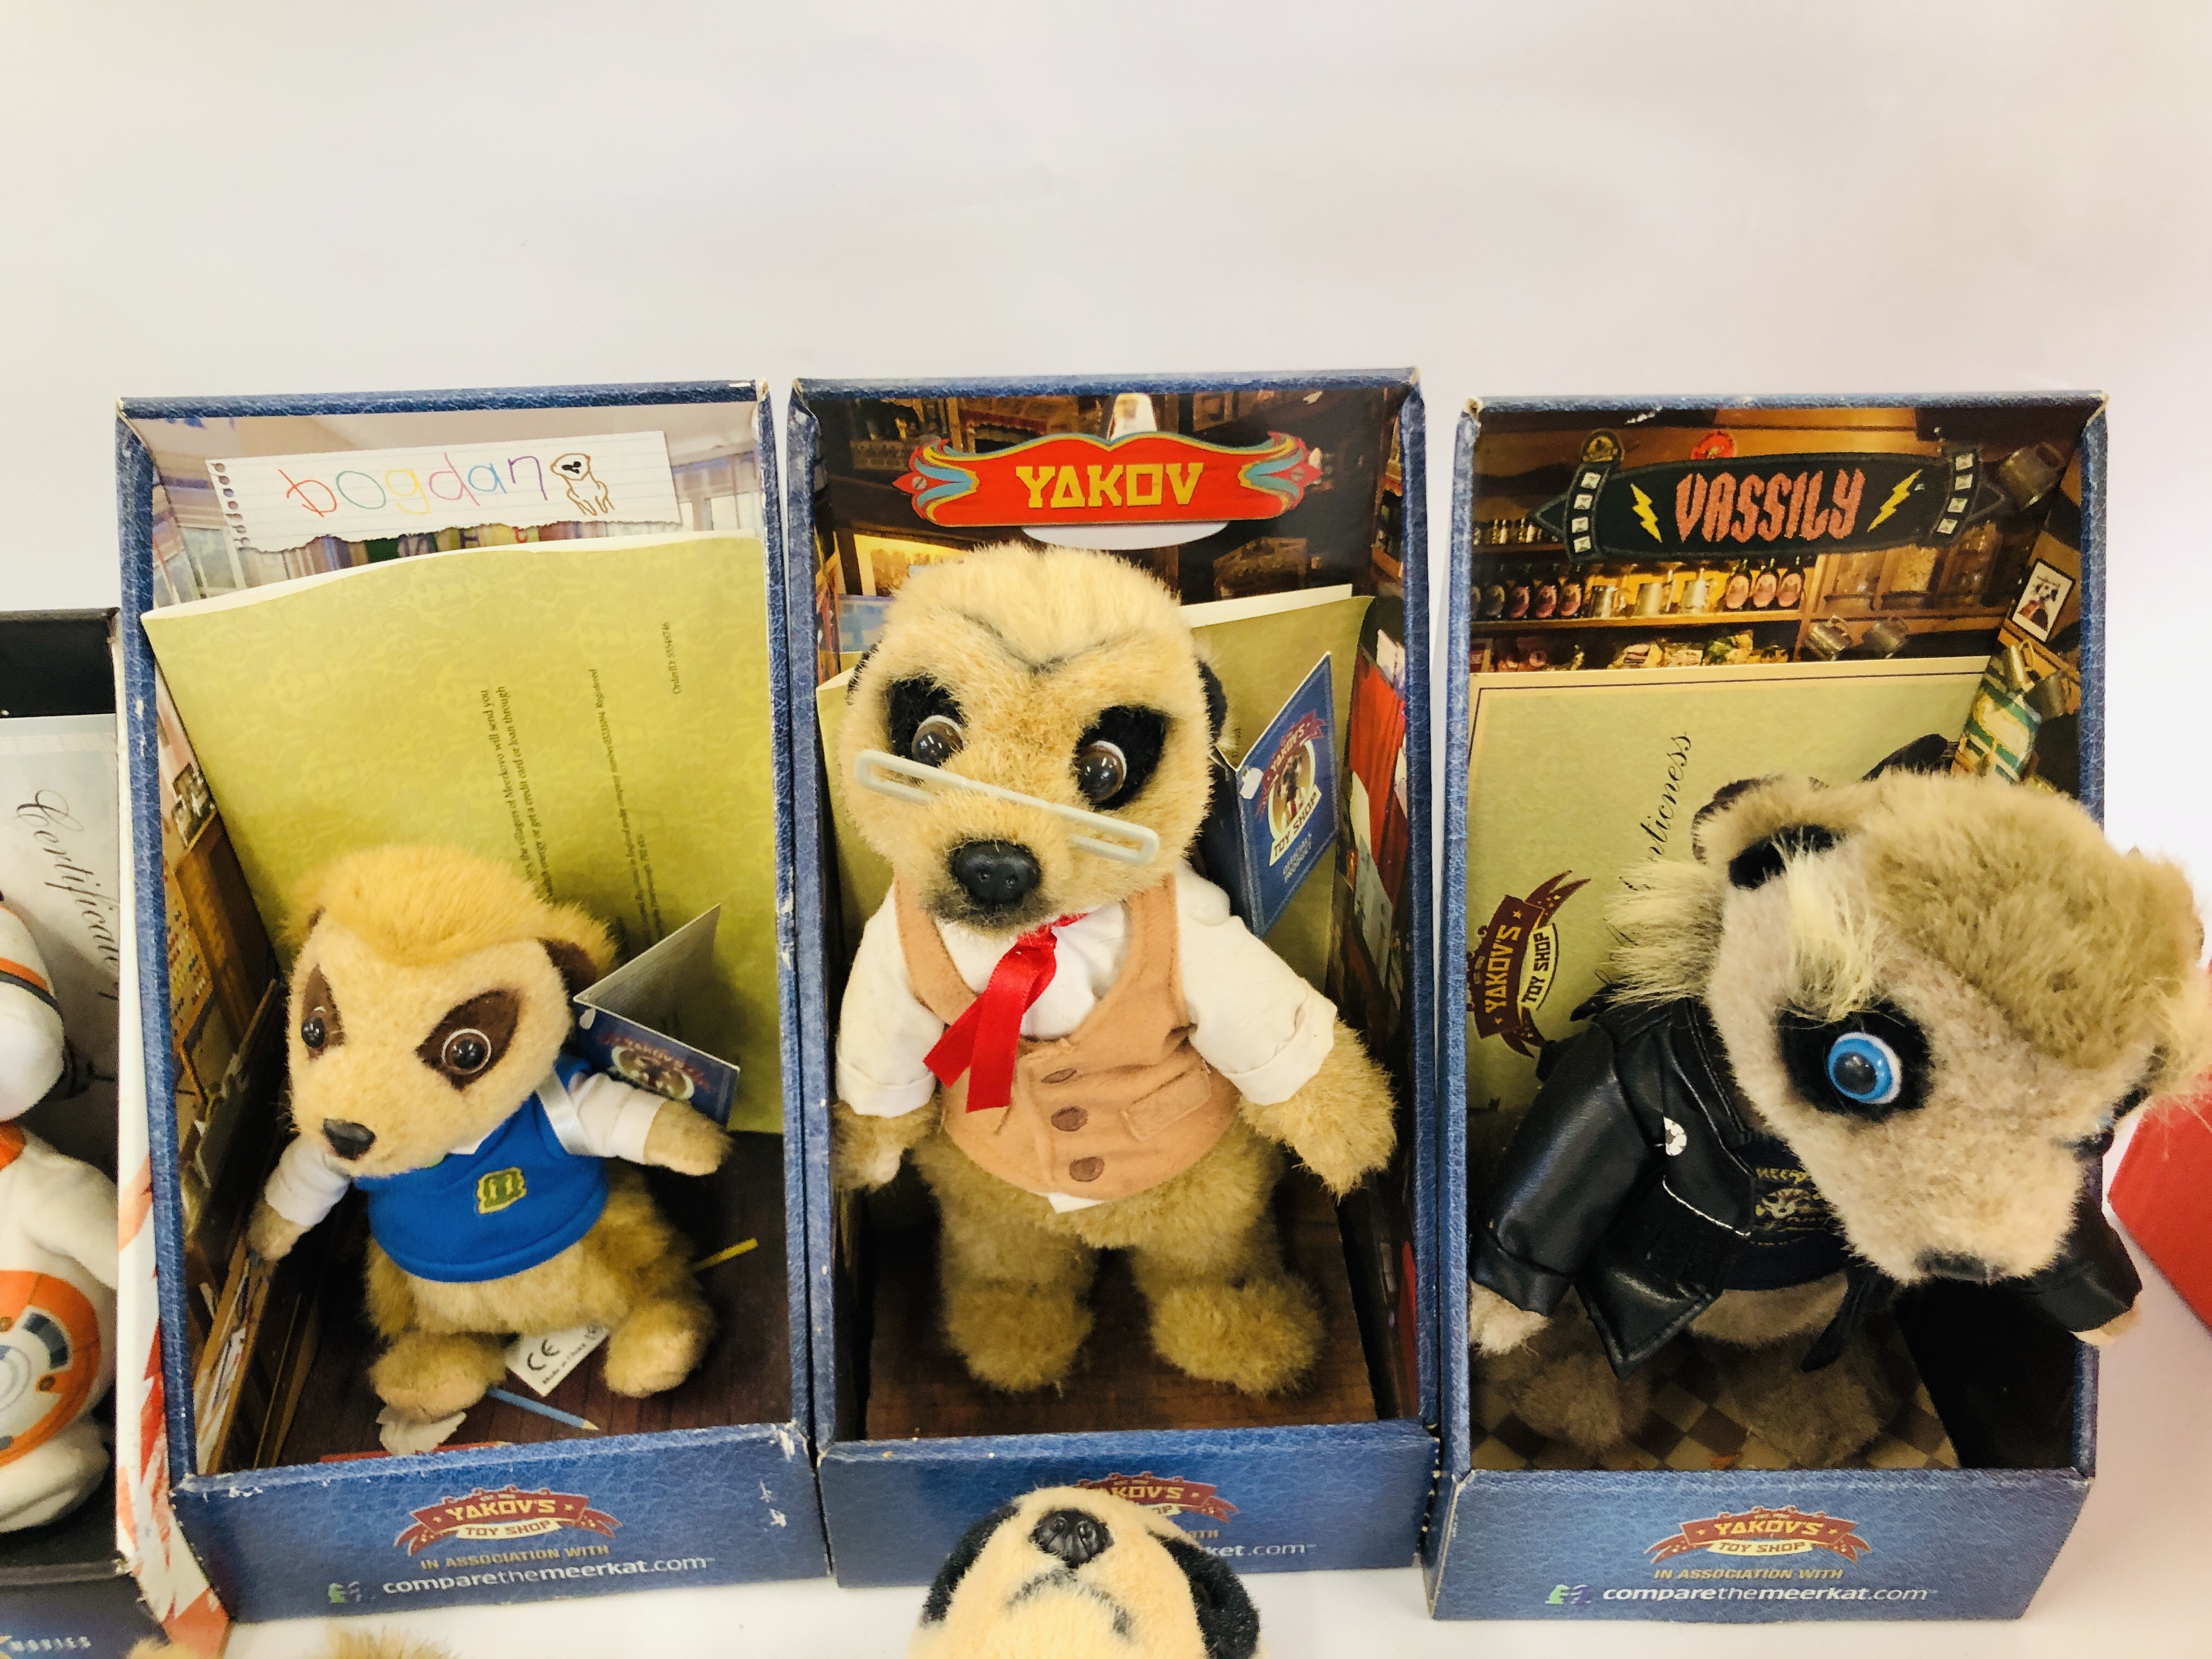 SEVEN BOXED COMPARE THE MARKET SOFT MEERKAT COLLECTORS TEDDIES TO INCLUDE YAKOV, VASSILY, - Image 3 of 4